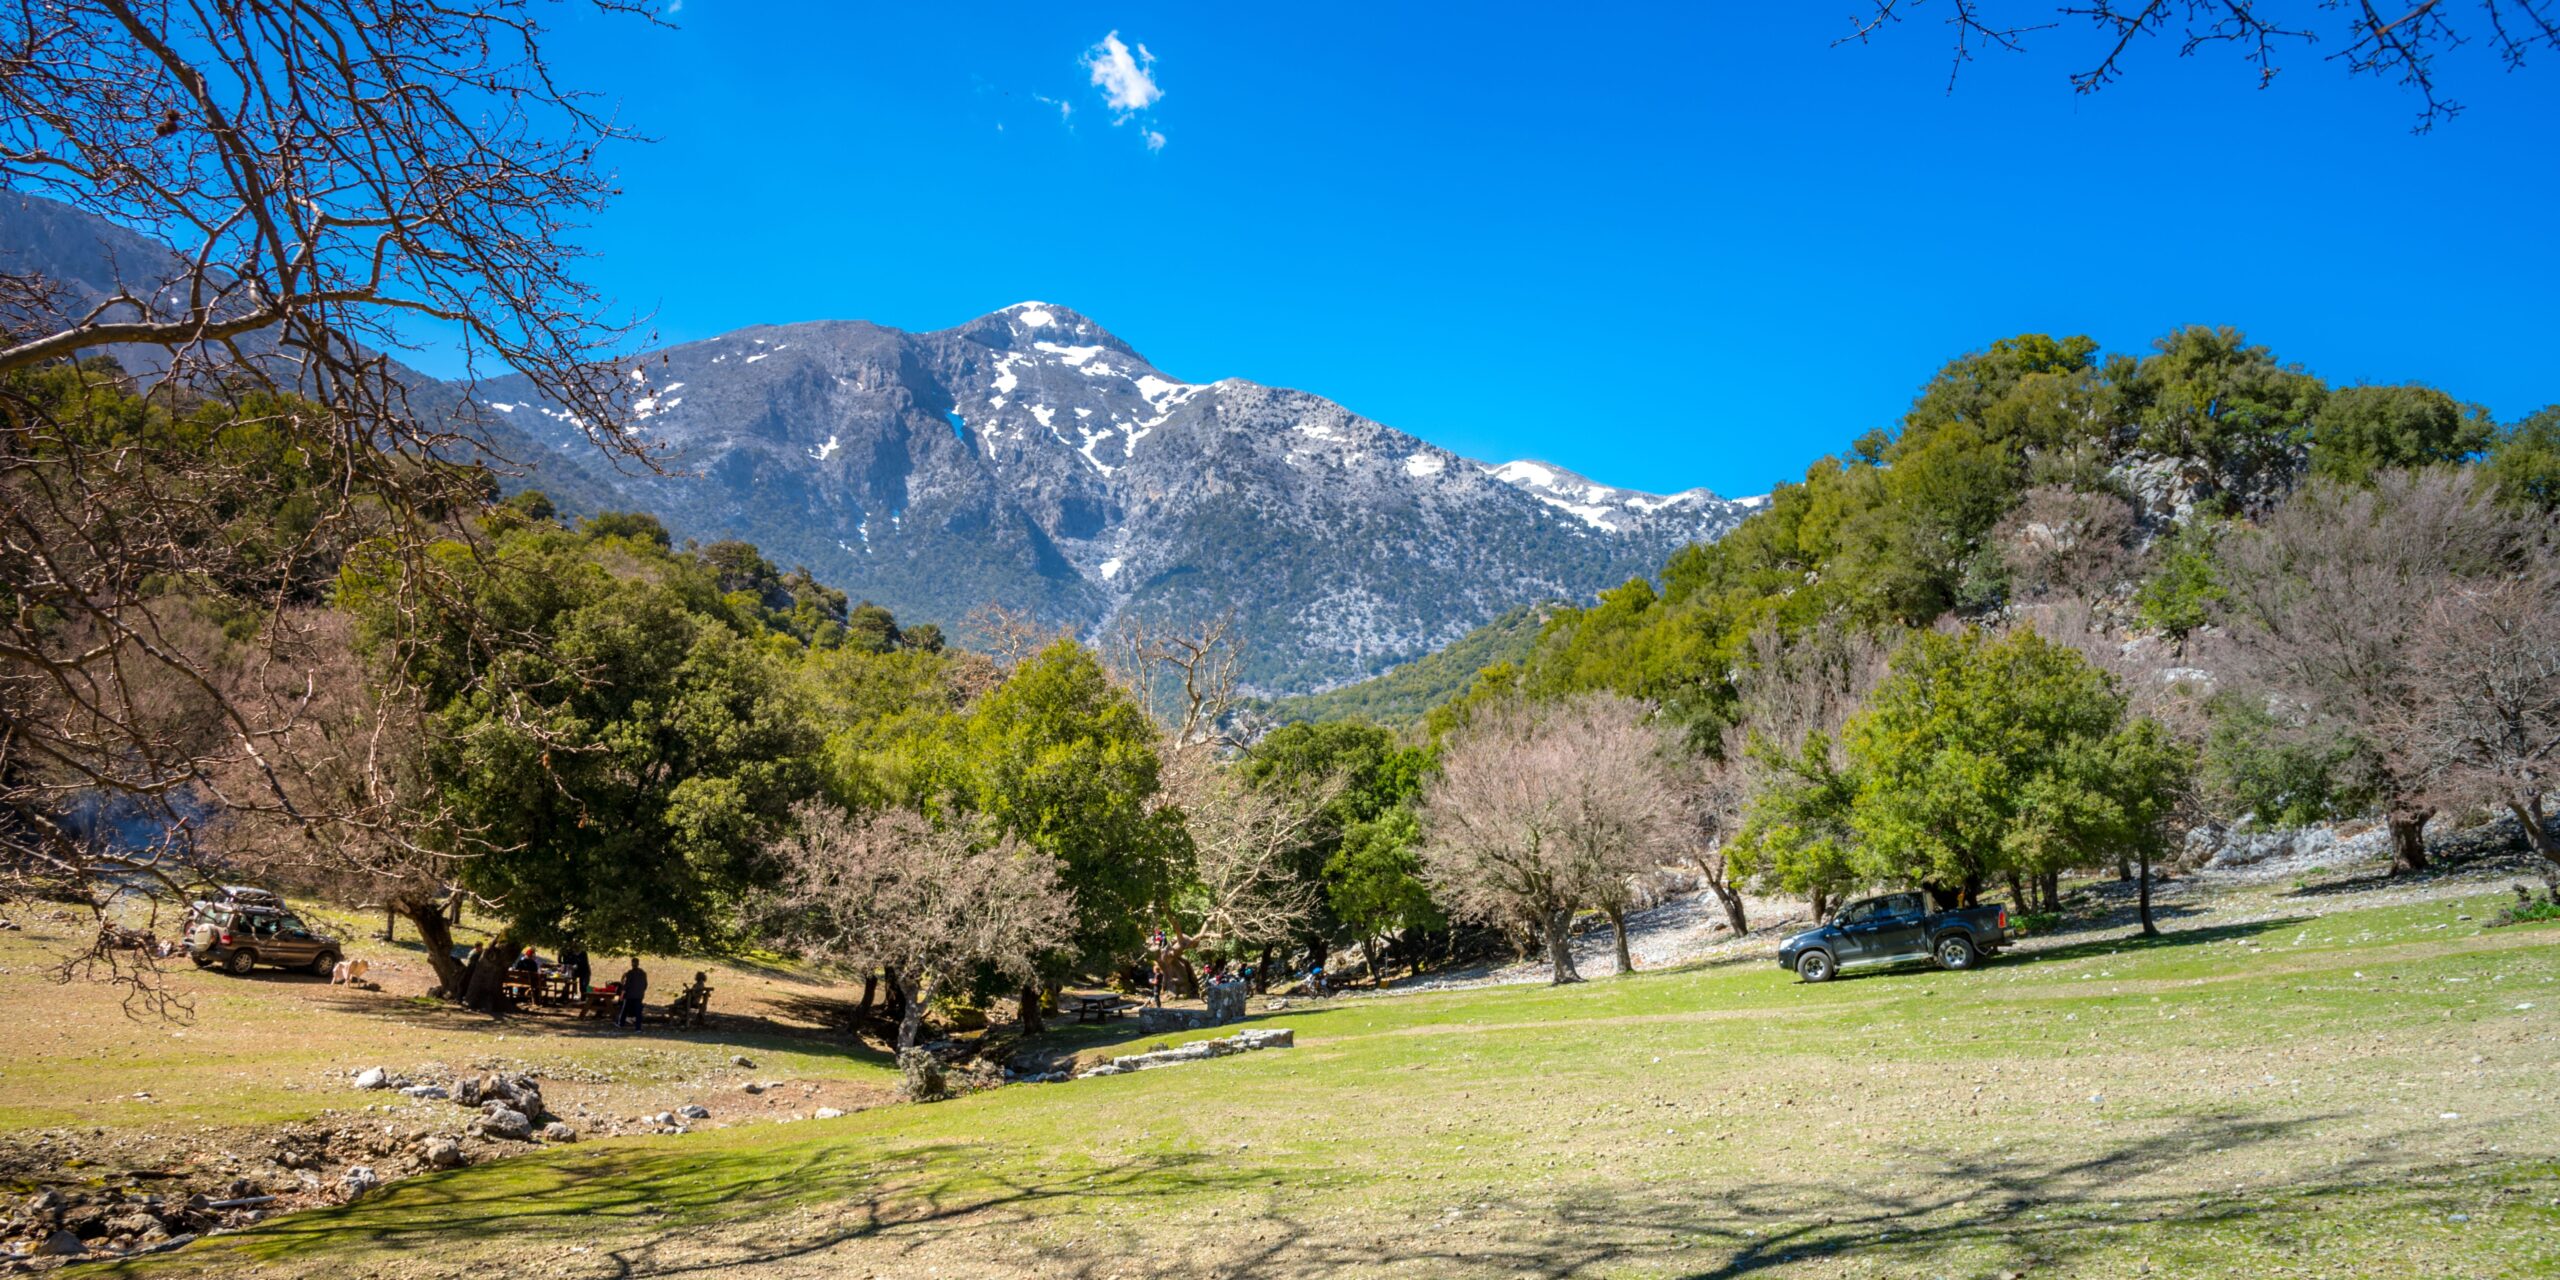 A mountain landscape with snow-capped peaks, a green meadow with trees, and vehicles parked under the shade.